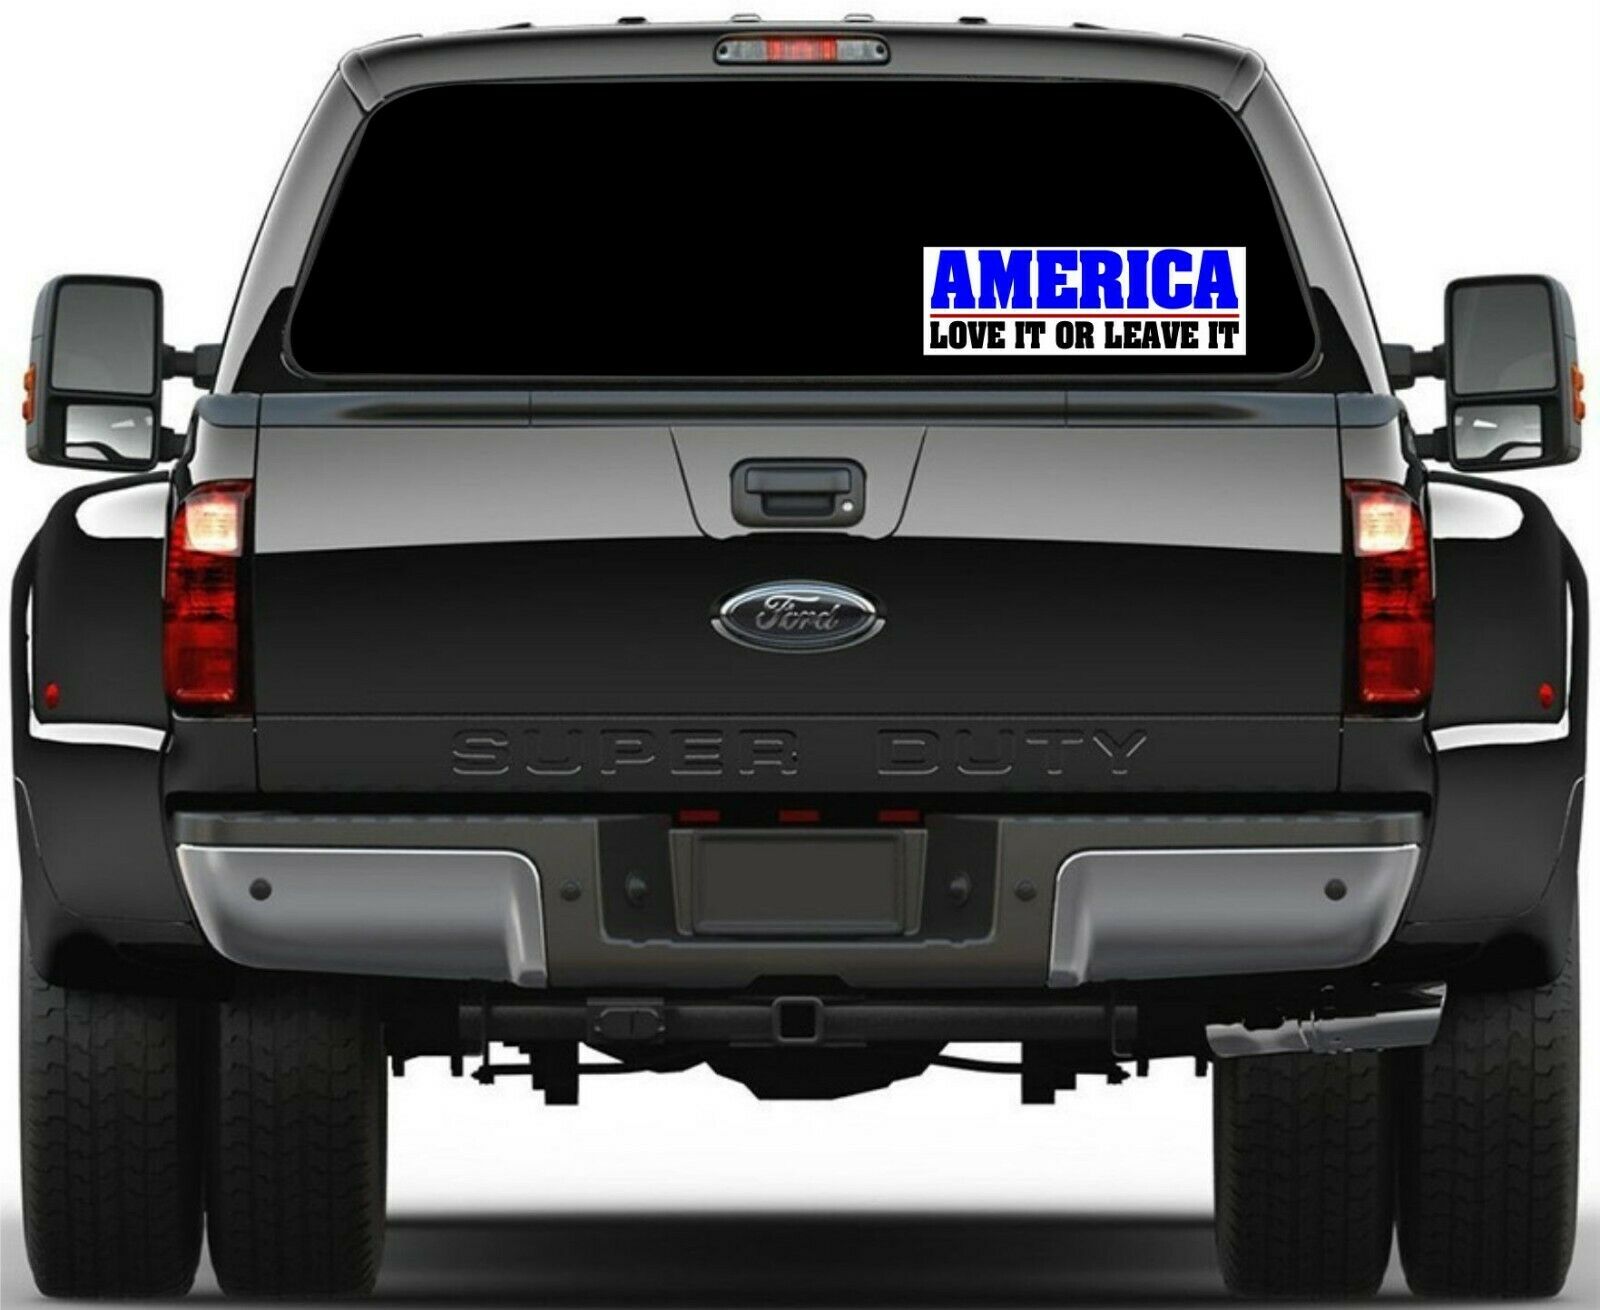 AMERICA LOVE IT OR LEAVE IT 8.8" x 3" Bumper Sticker Buy 3 get one free! - Powercall Sirens LLC